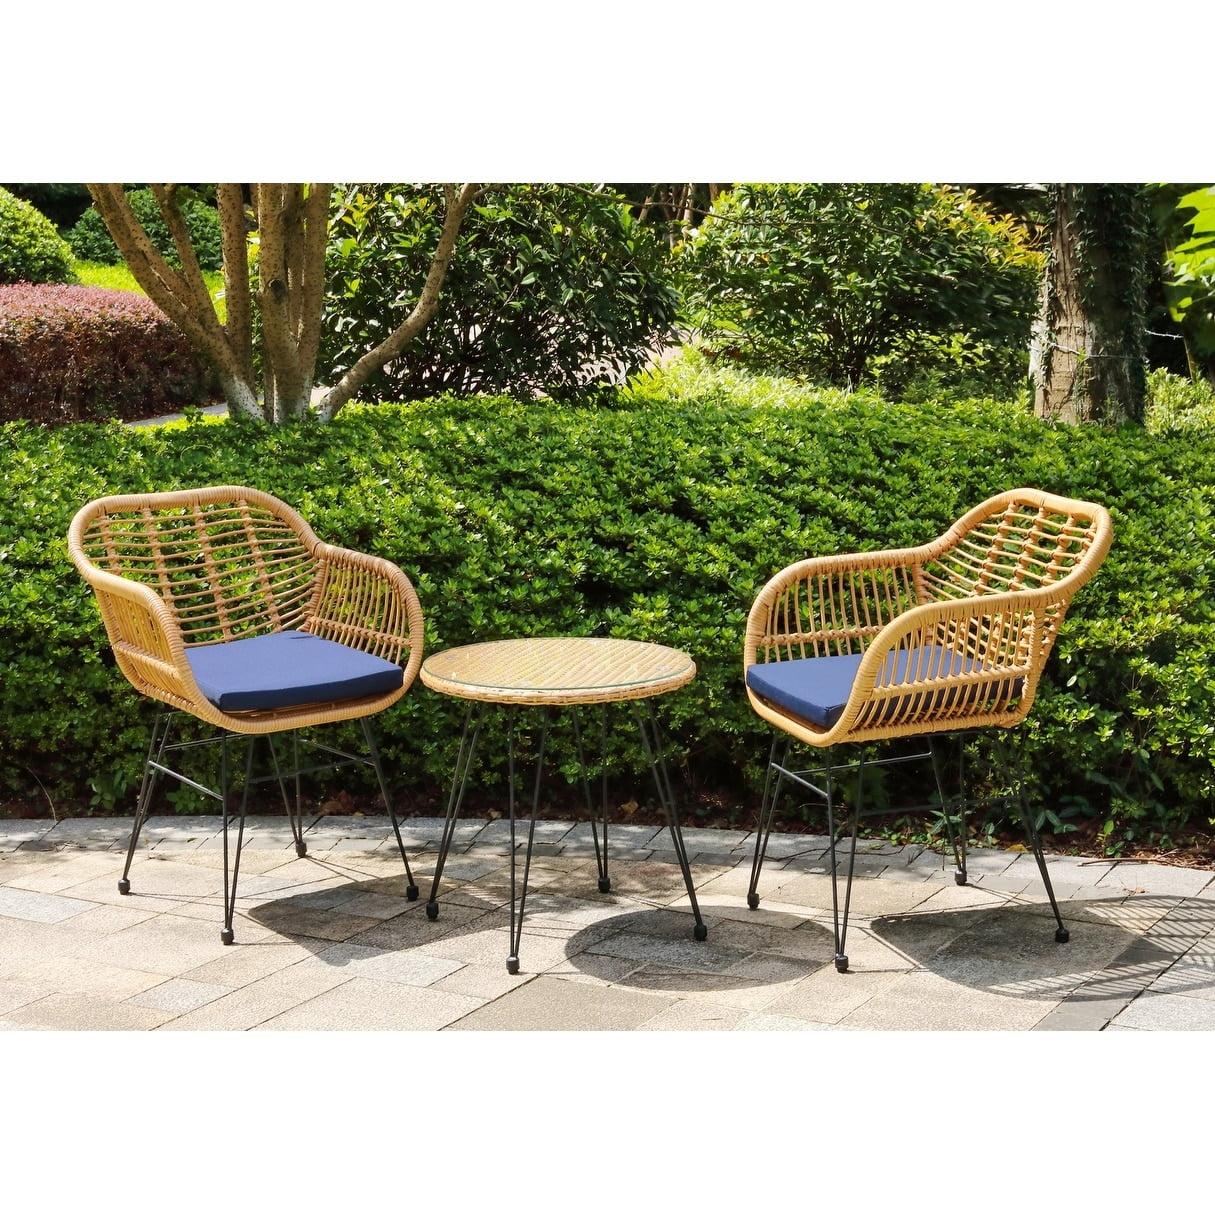 Crescent Navy Blue 3-Piece Wicker Outdoor Bistro Set with Cushions